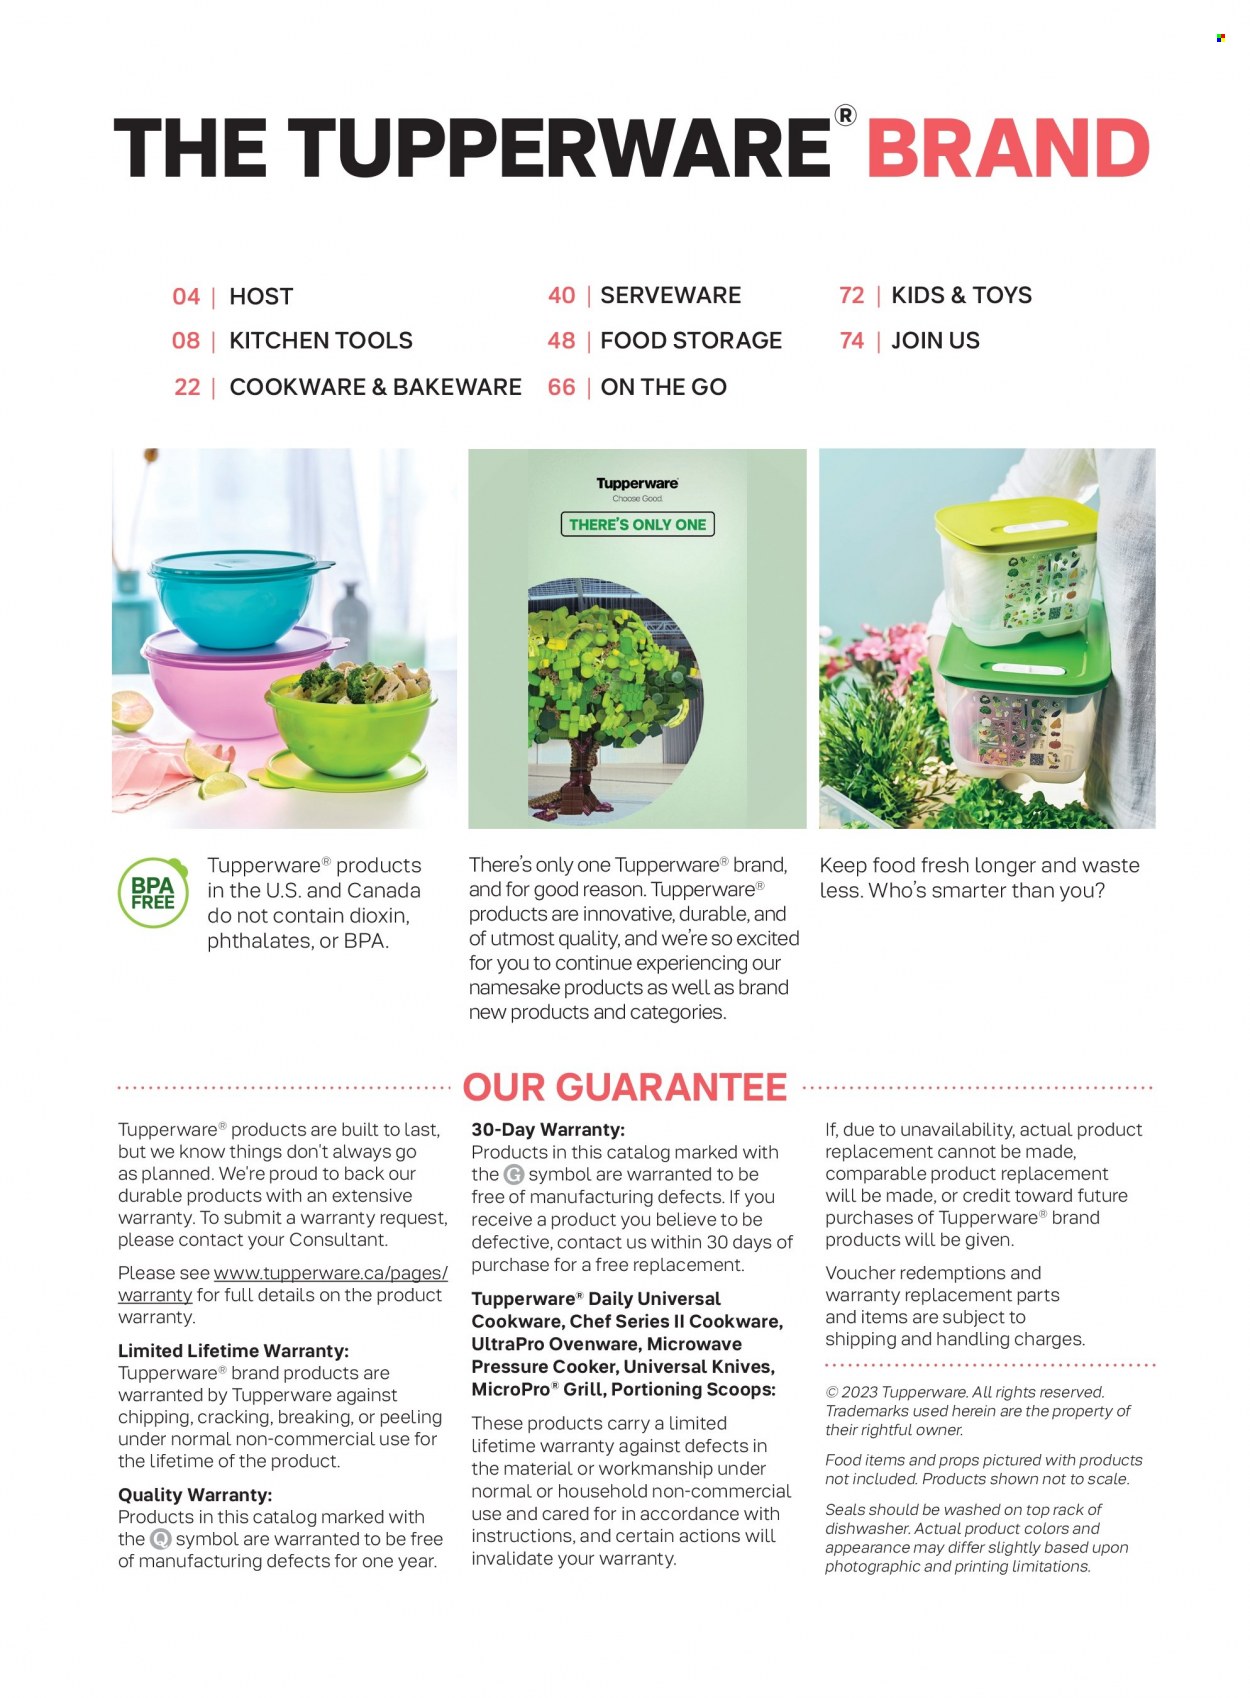 Circulaire Tupperware . Page 3.